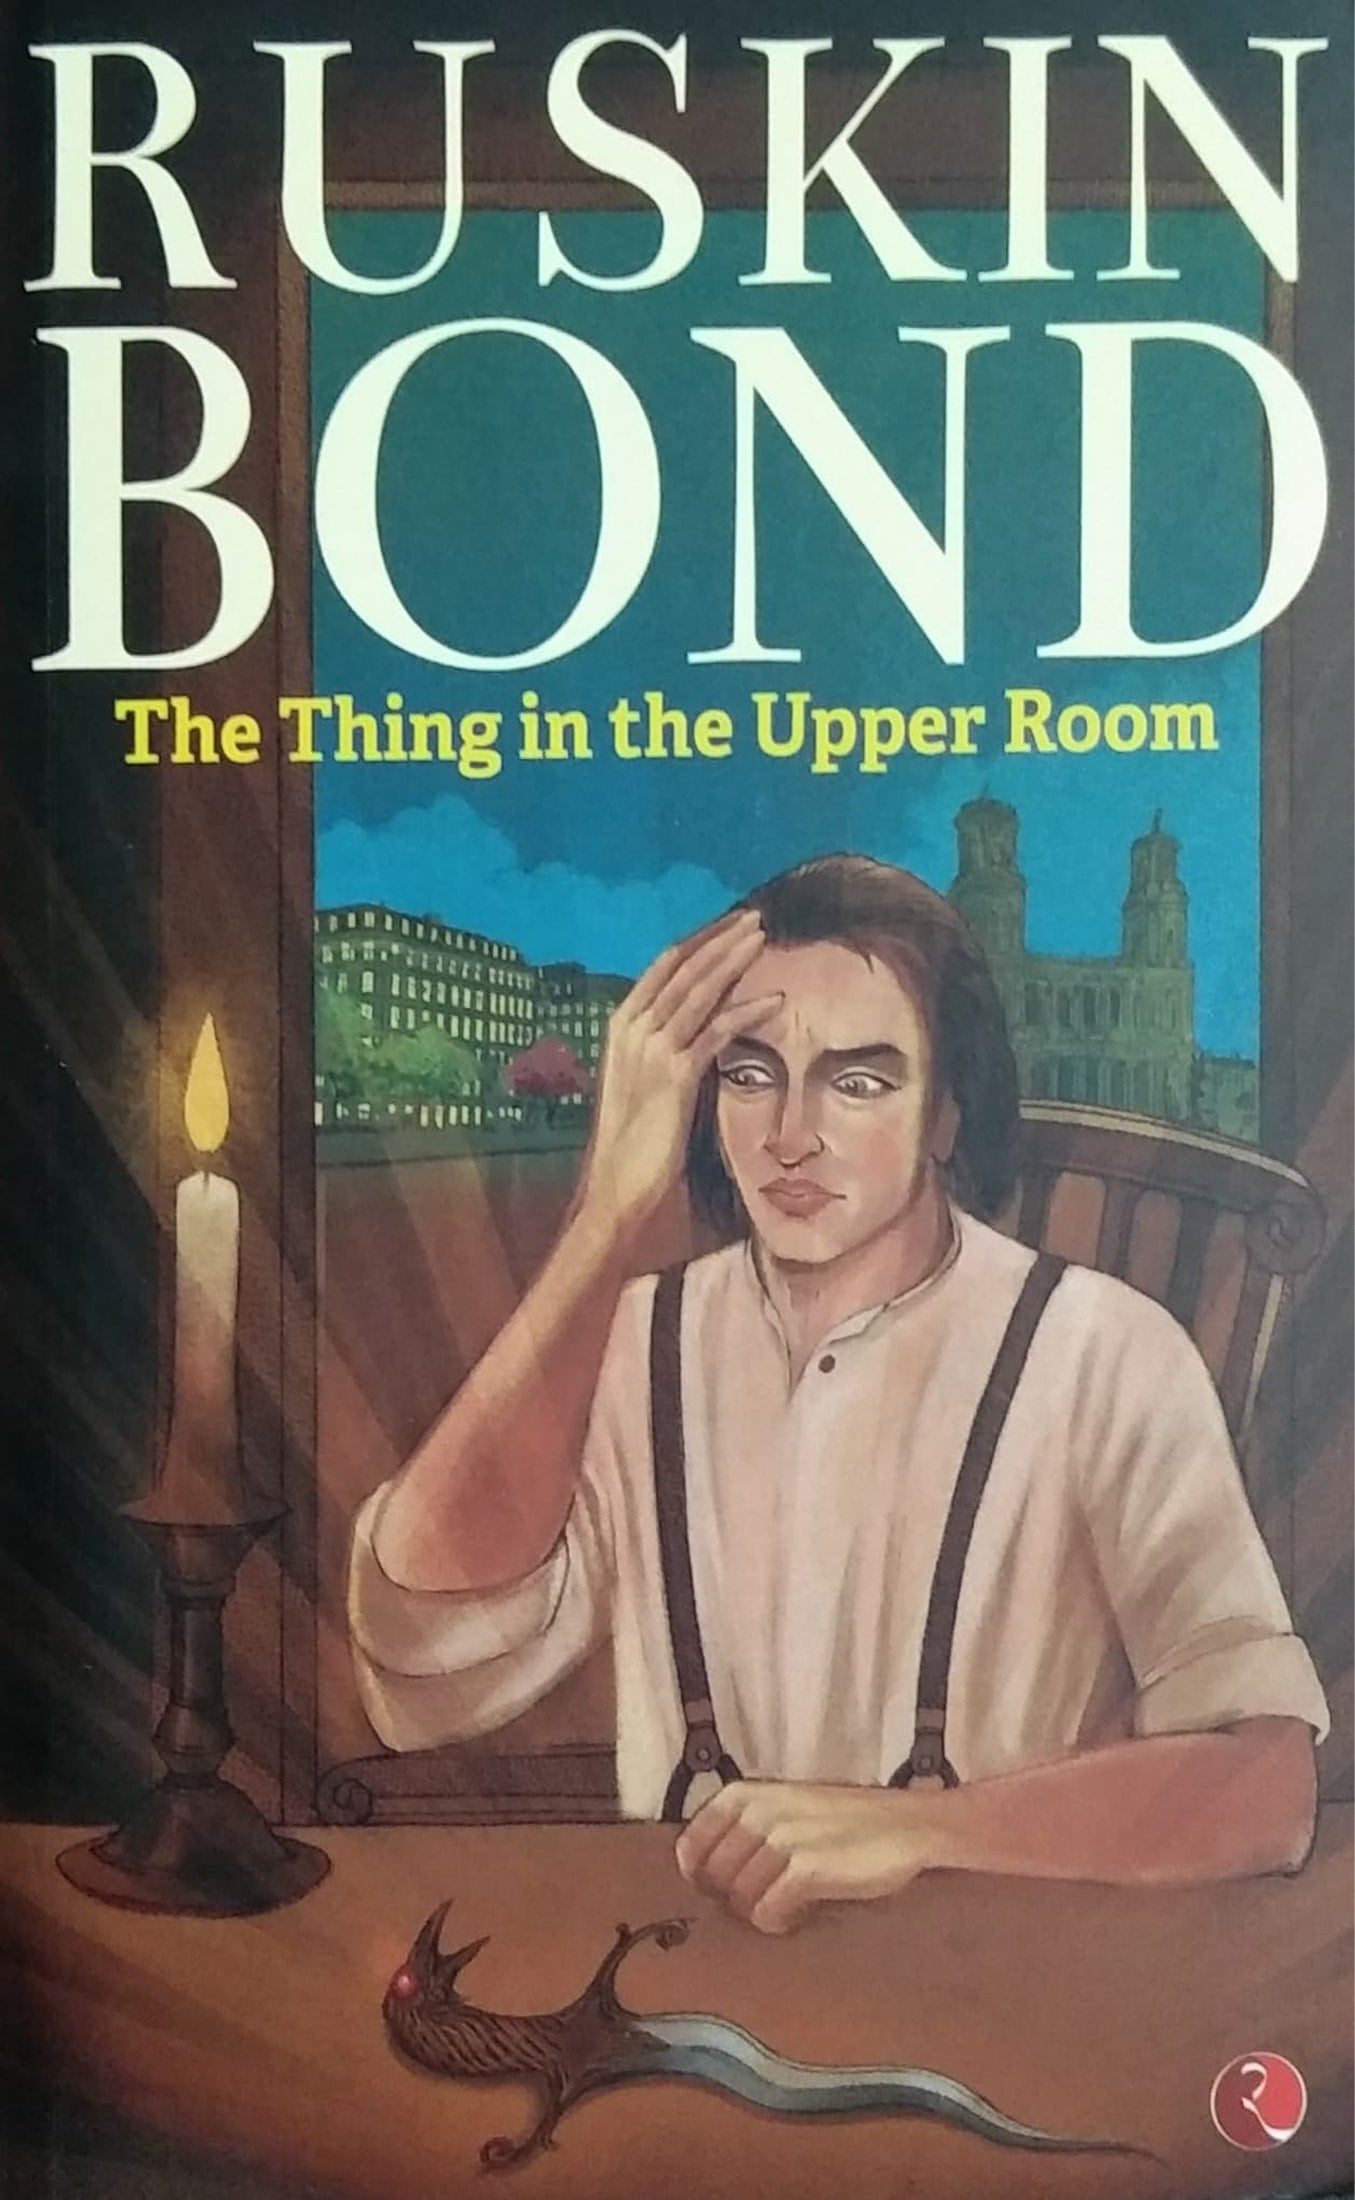 RUSKIN BOND - The Thing in the Upper Room